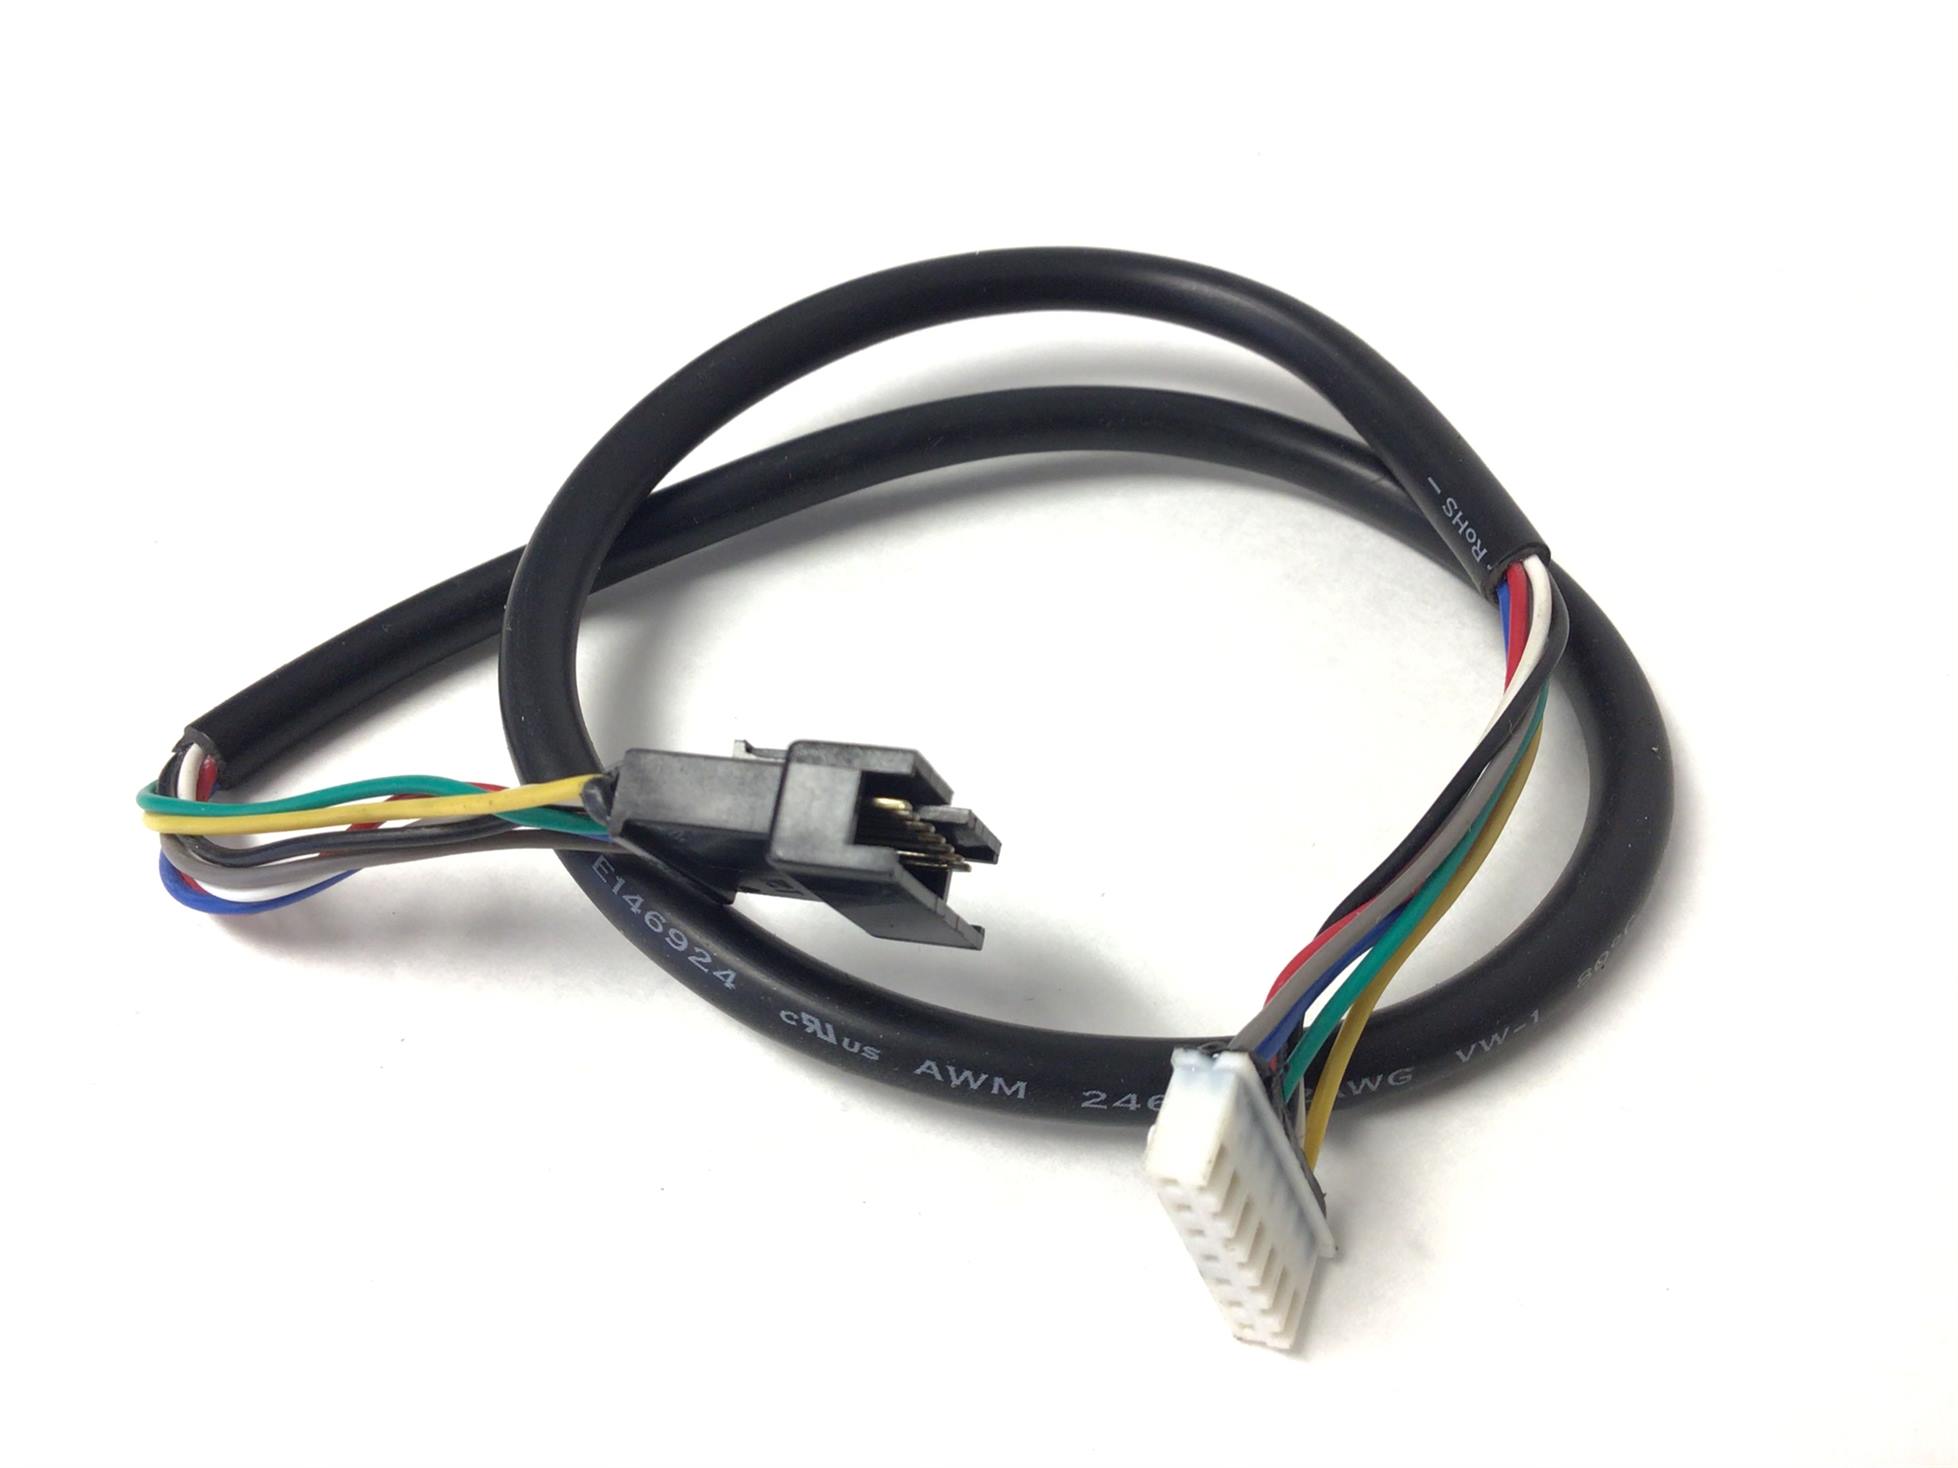 Top Console Wire Harness (Used)